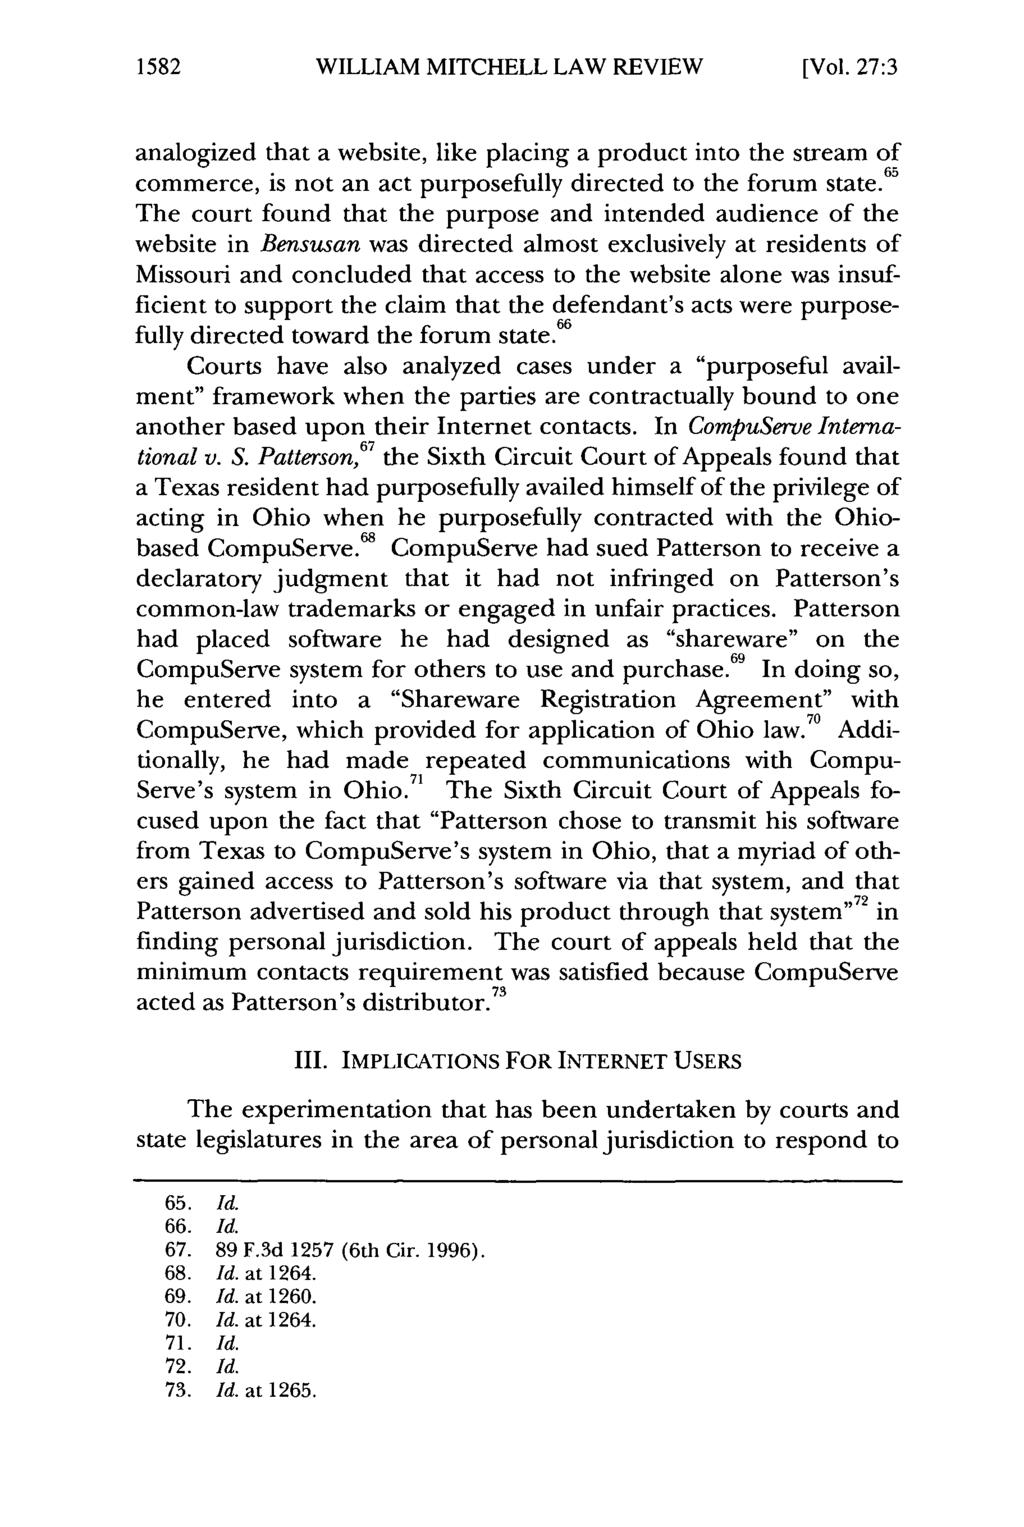 1582 William WILLIAM Mitchell Law MITCHELL Review, Vol. 27, LAW Iss. 3 REVIEW [2001], Art. 13 [Vol.